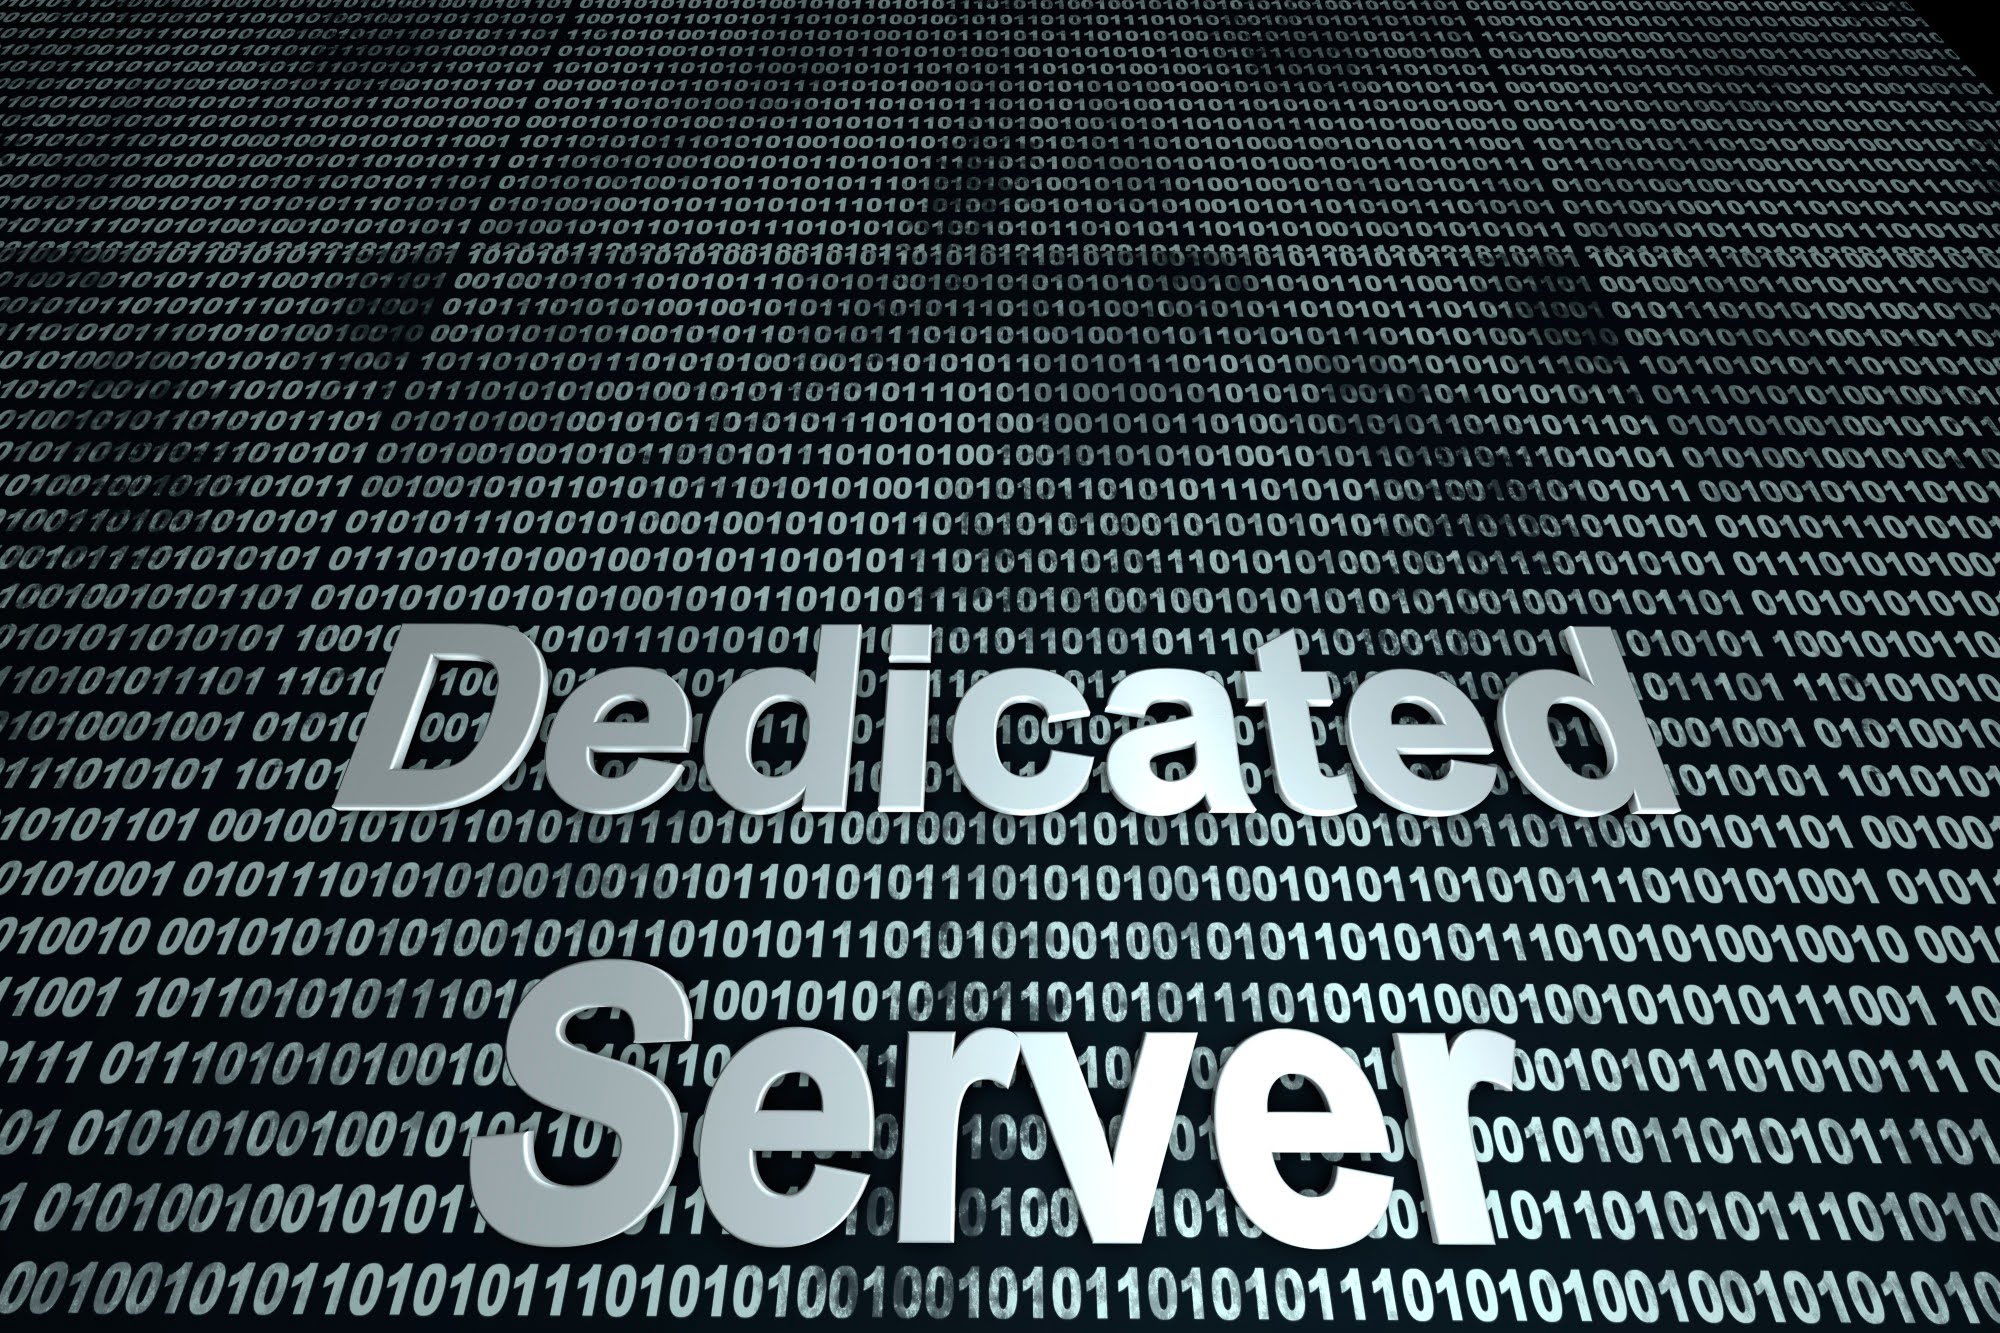 Dedicated Server Vs VPS - What's the Difference?